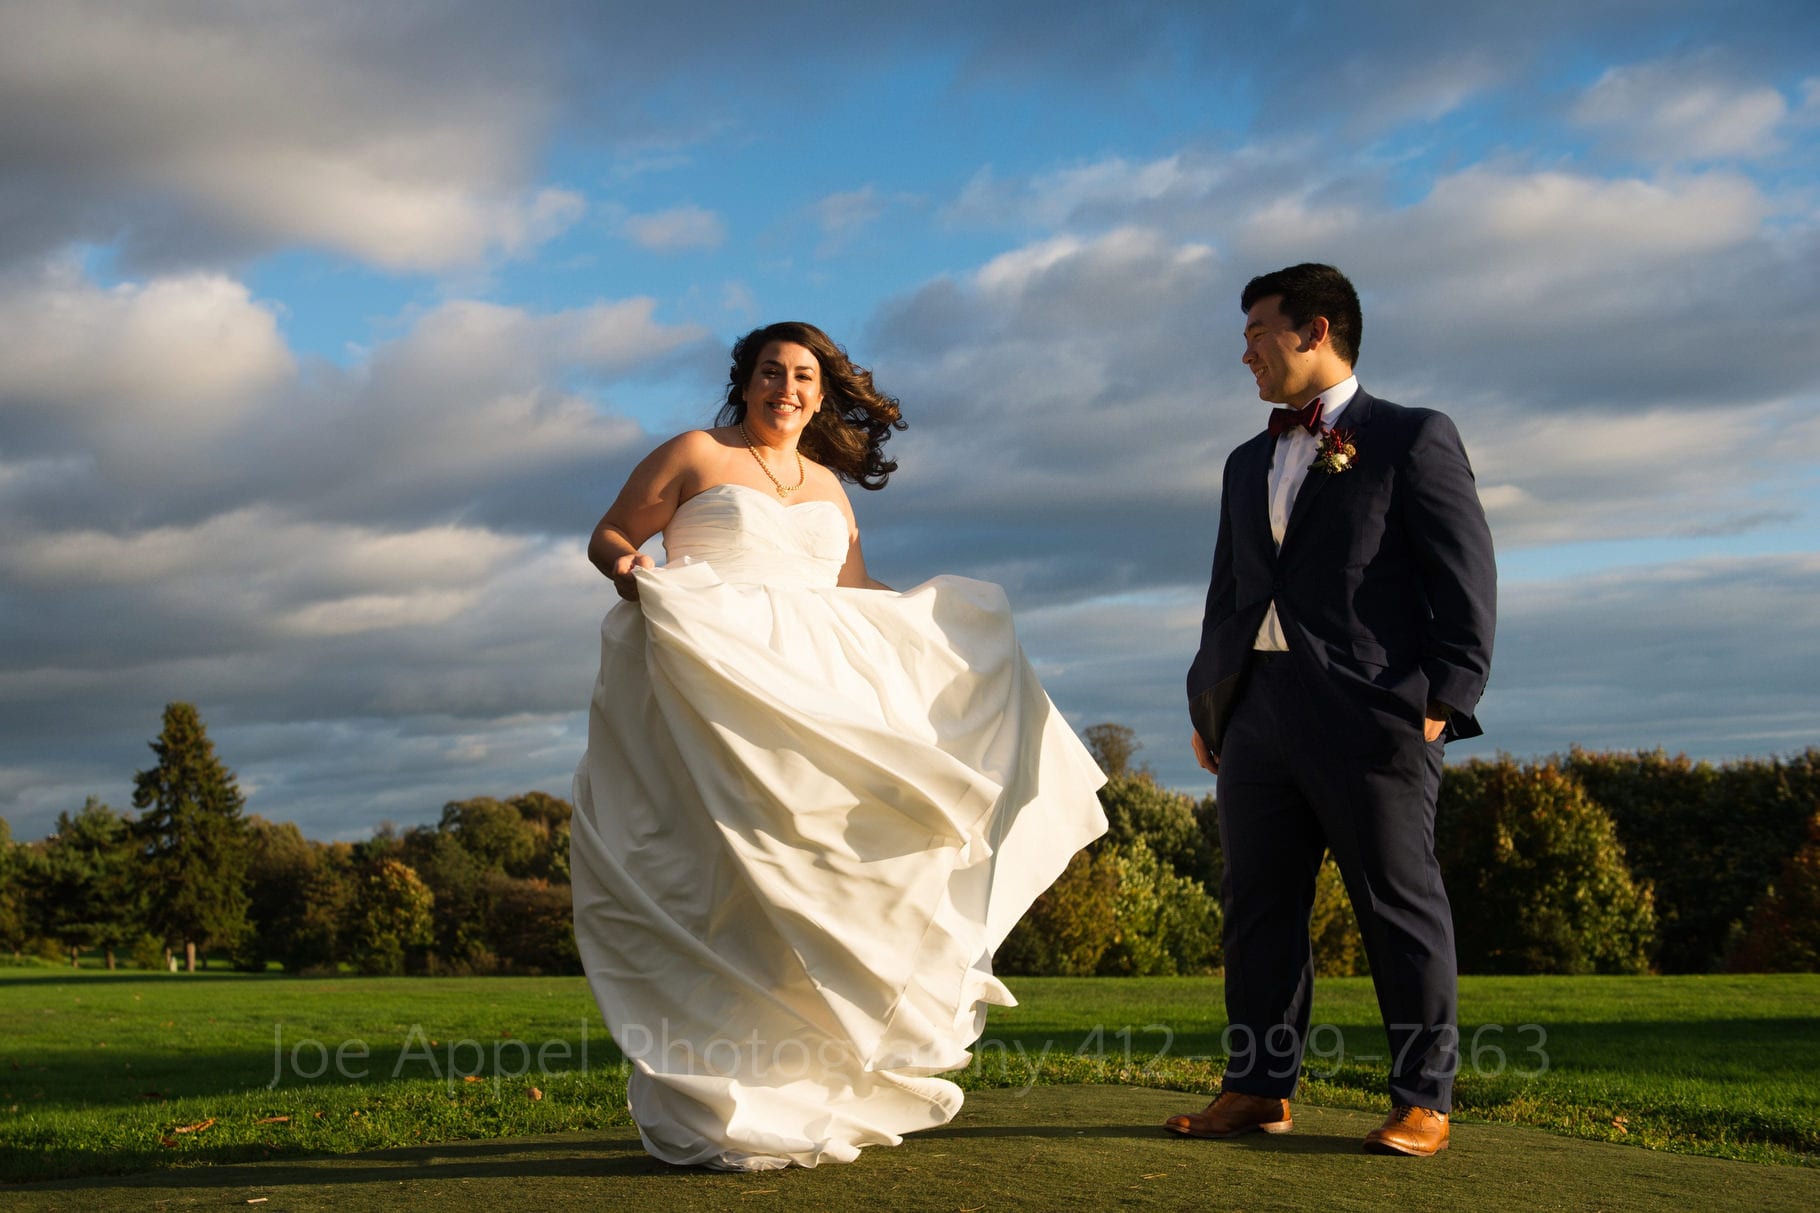 A bride and groom stand in the sunlight with puffy white clouds in the blue sky above them.